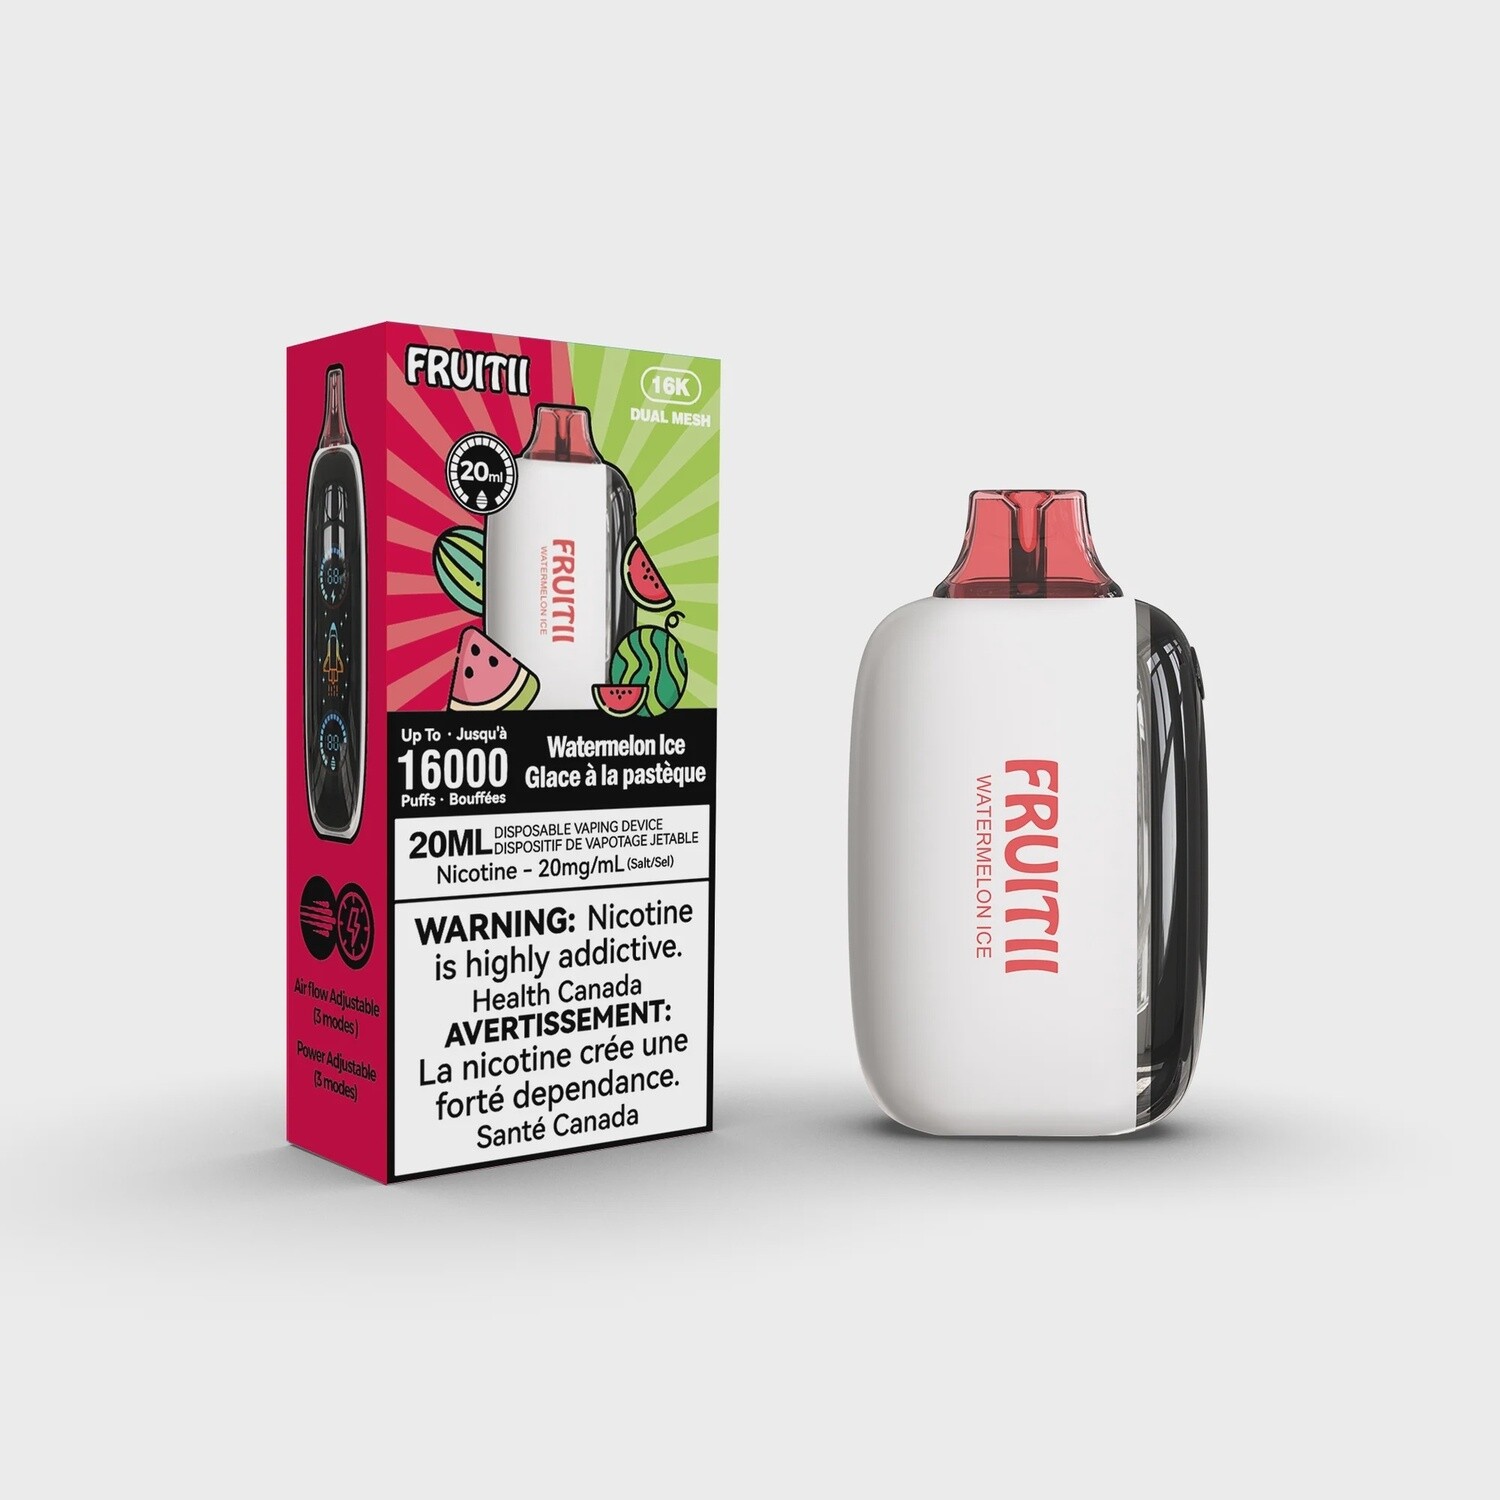 FRUITII DISPOSABLE (16,000 PUFFS) RECHARGEABLE